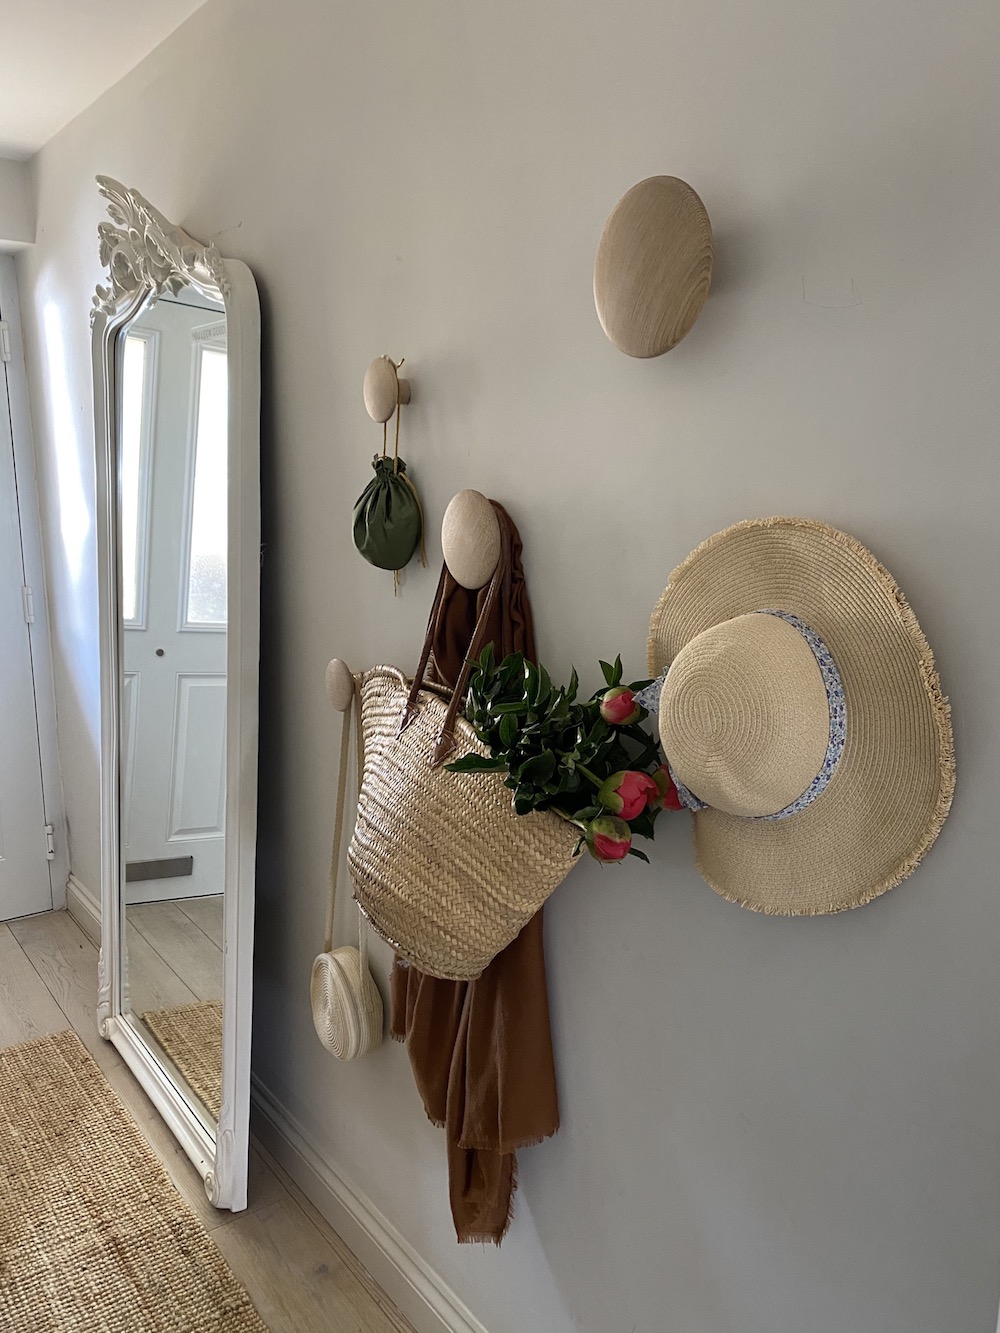 Pegs and a standing mirror in a hallway with a sisal runner